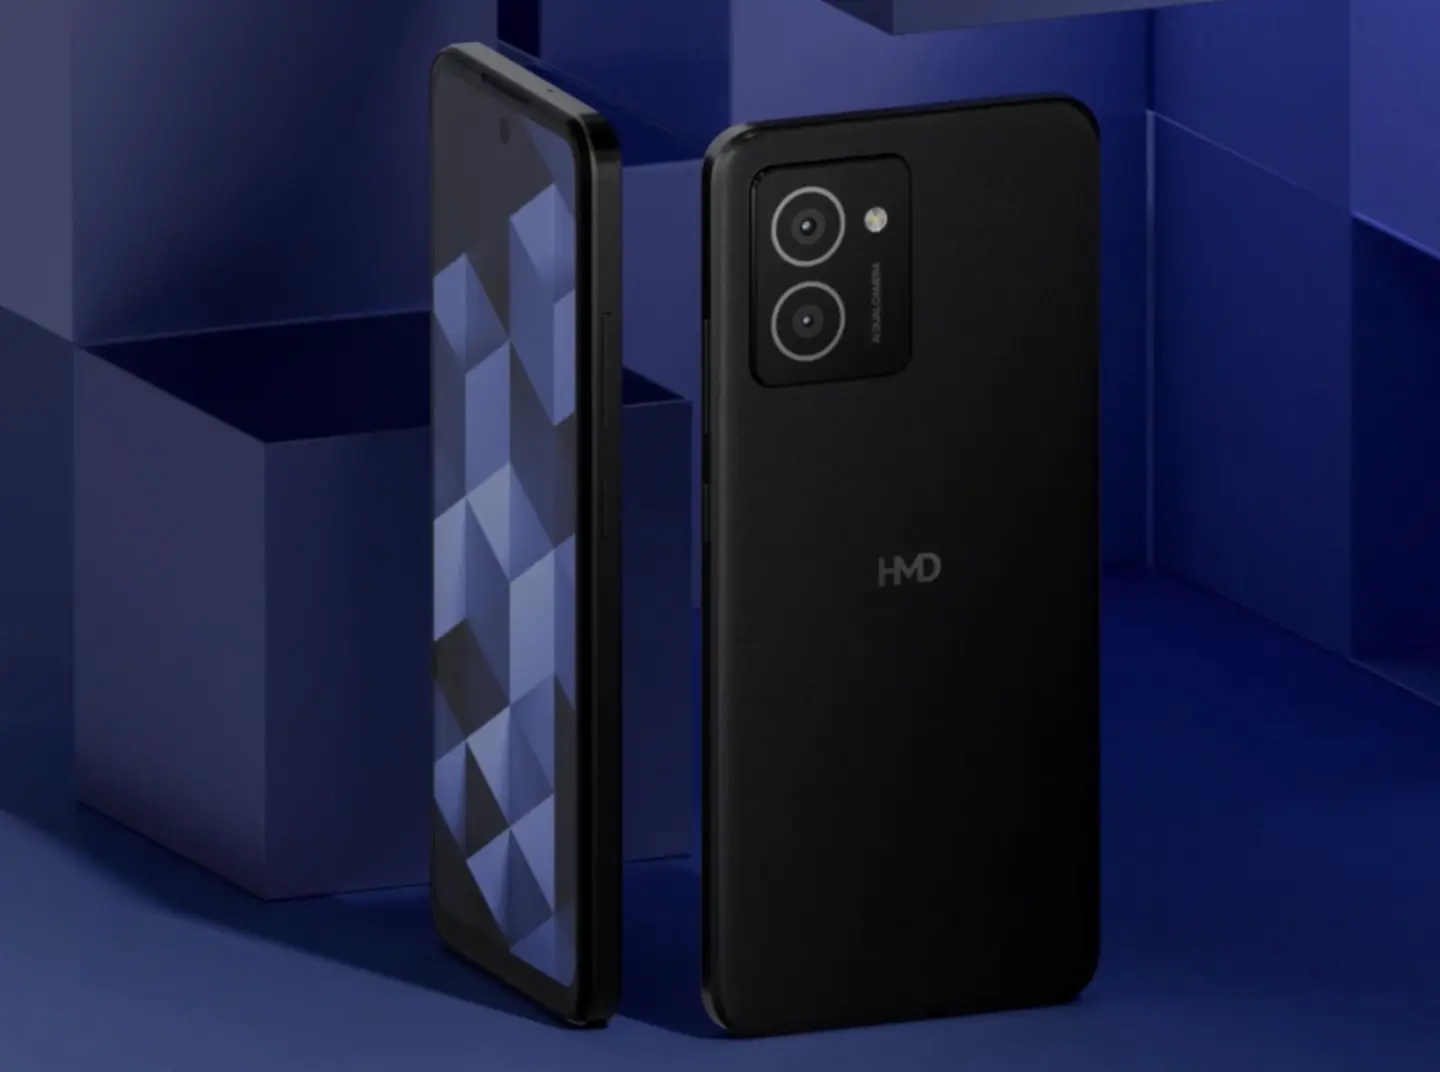 HMD Vibe First Look, Specs and Price Surfaces Online